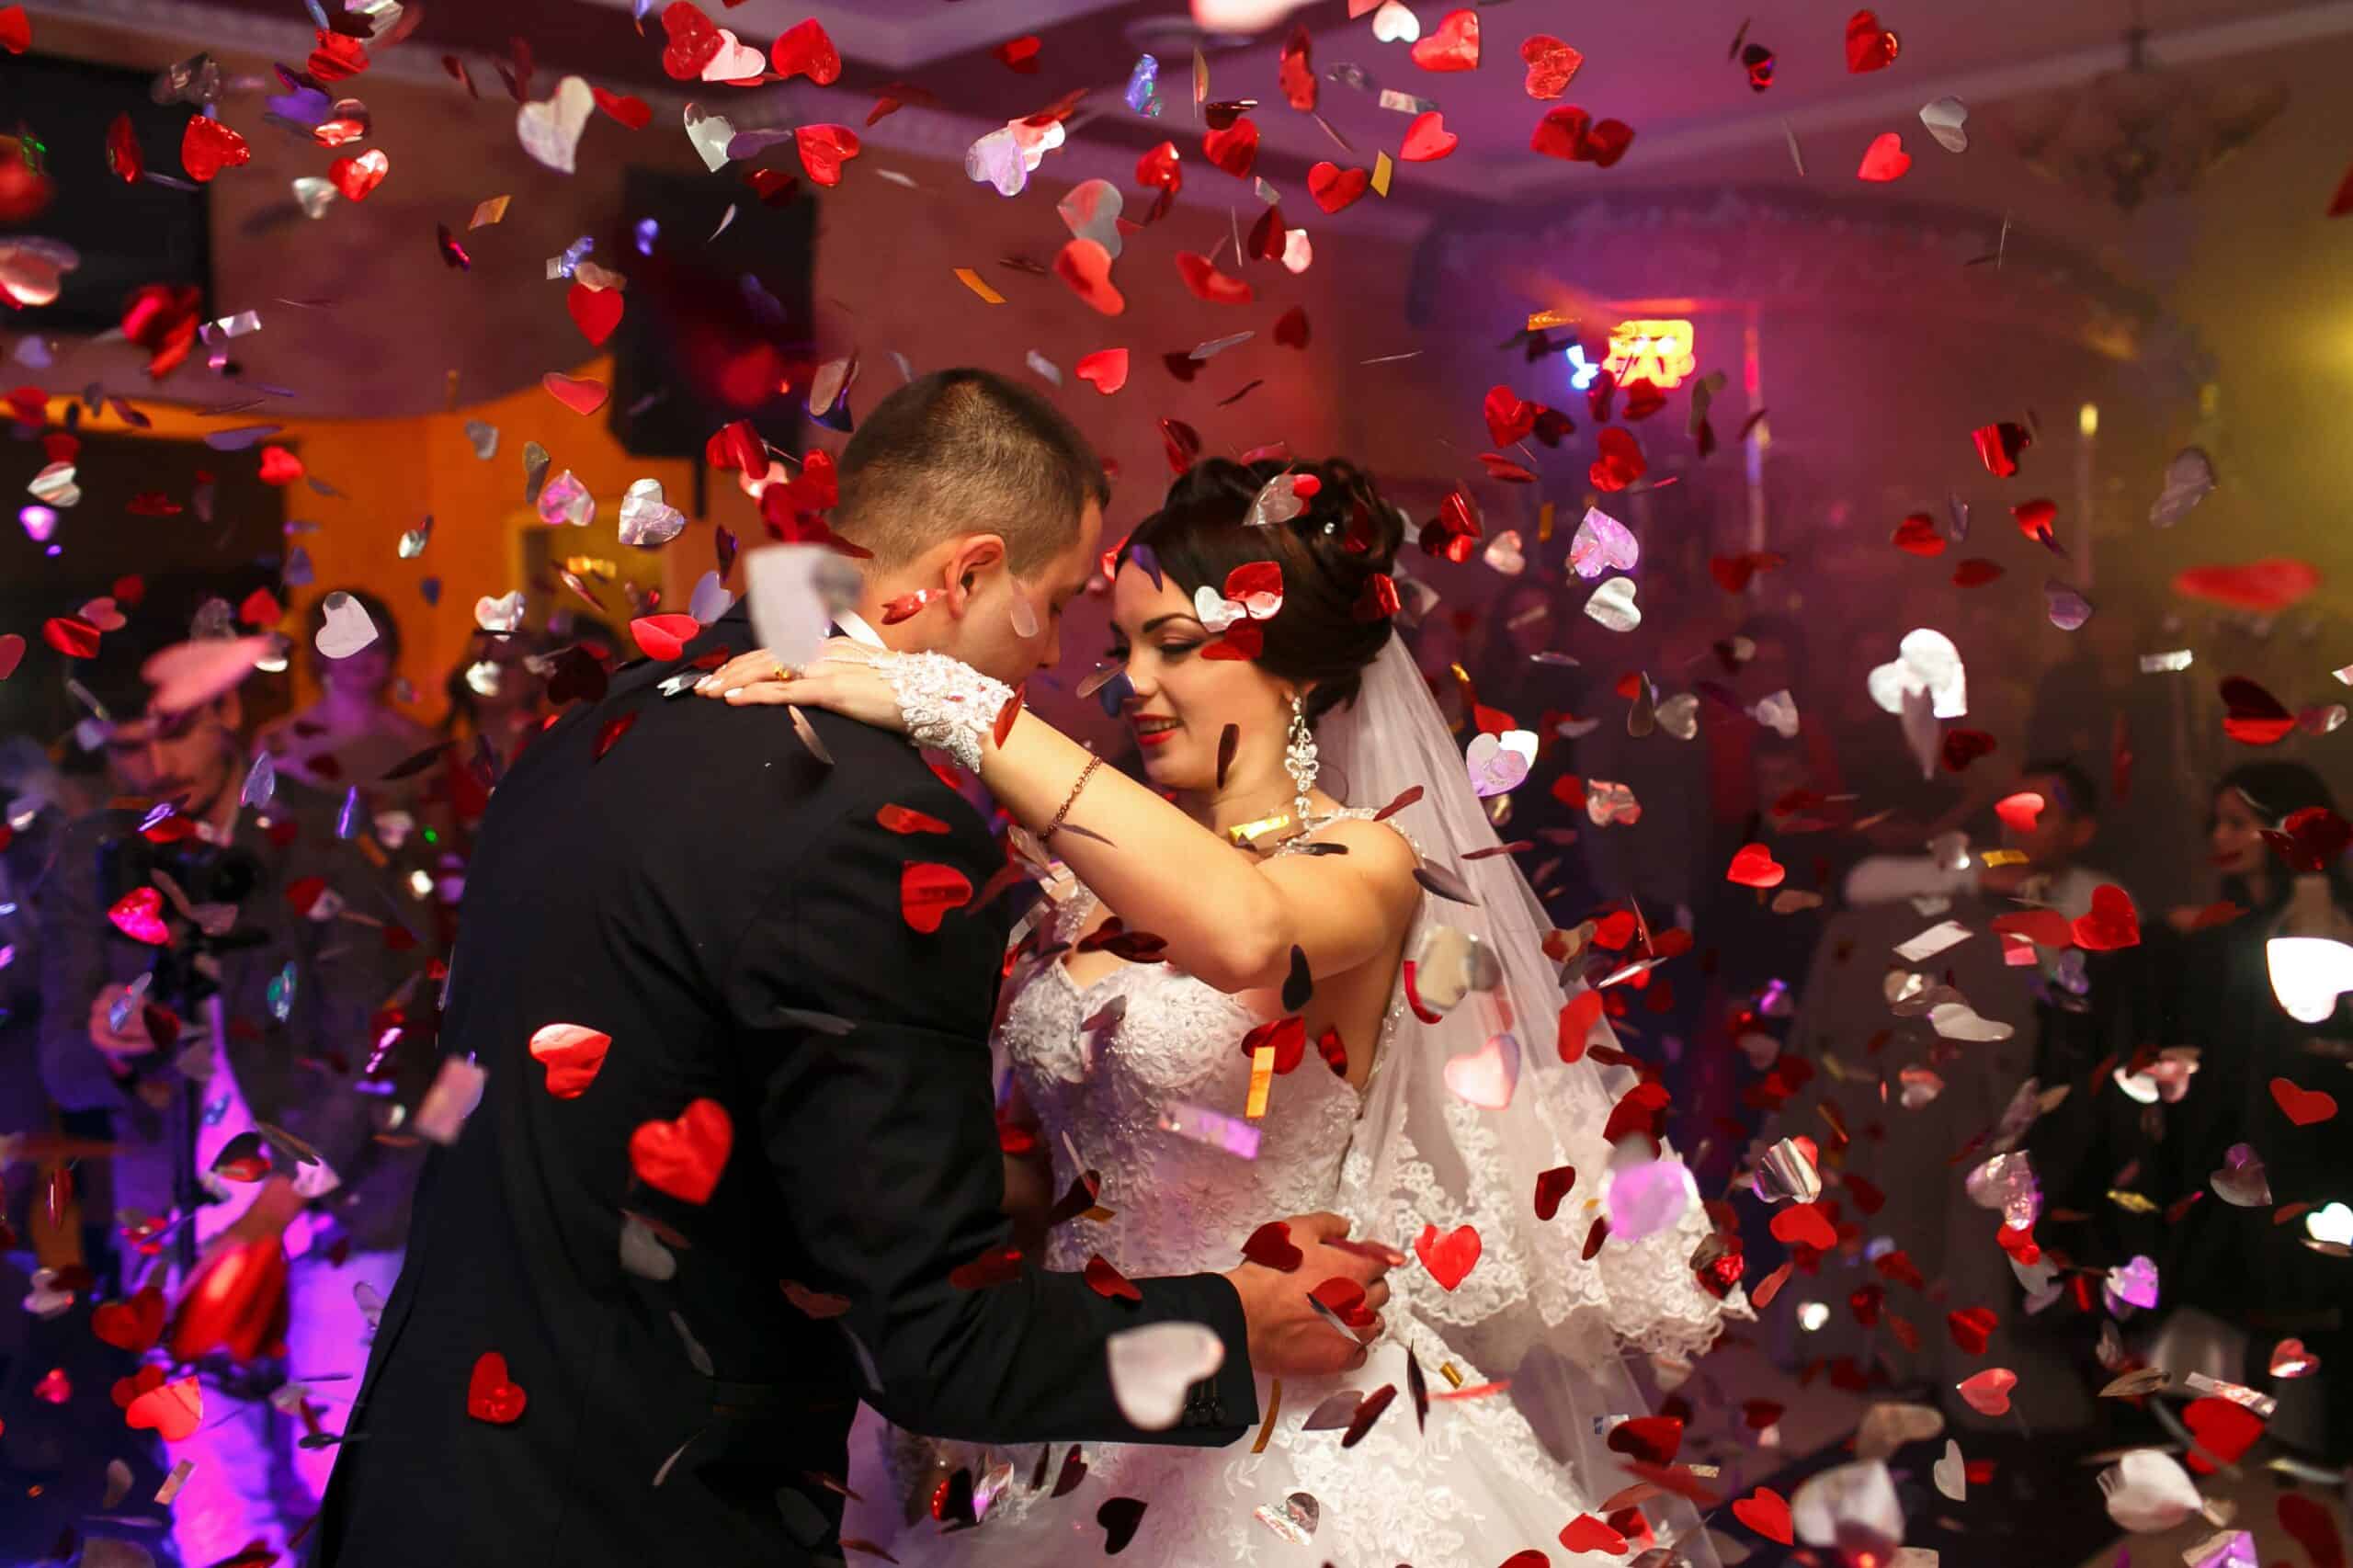 The pros and cons of an adults-only wedding